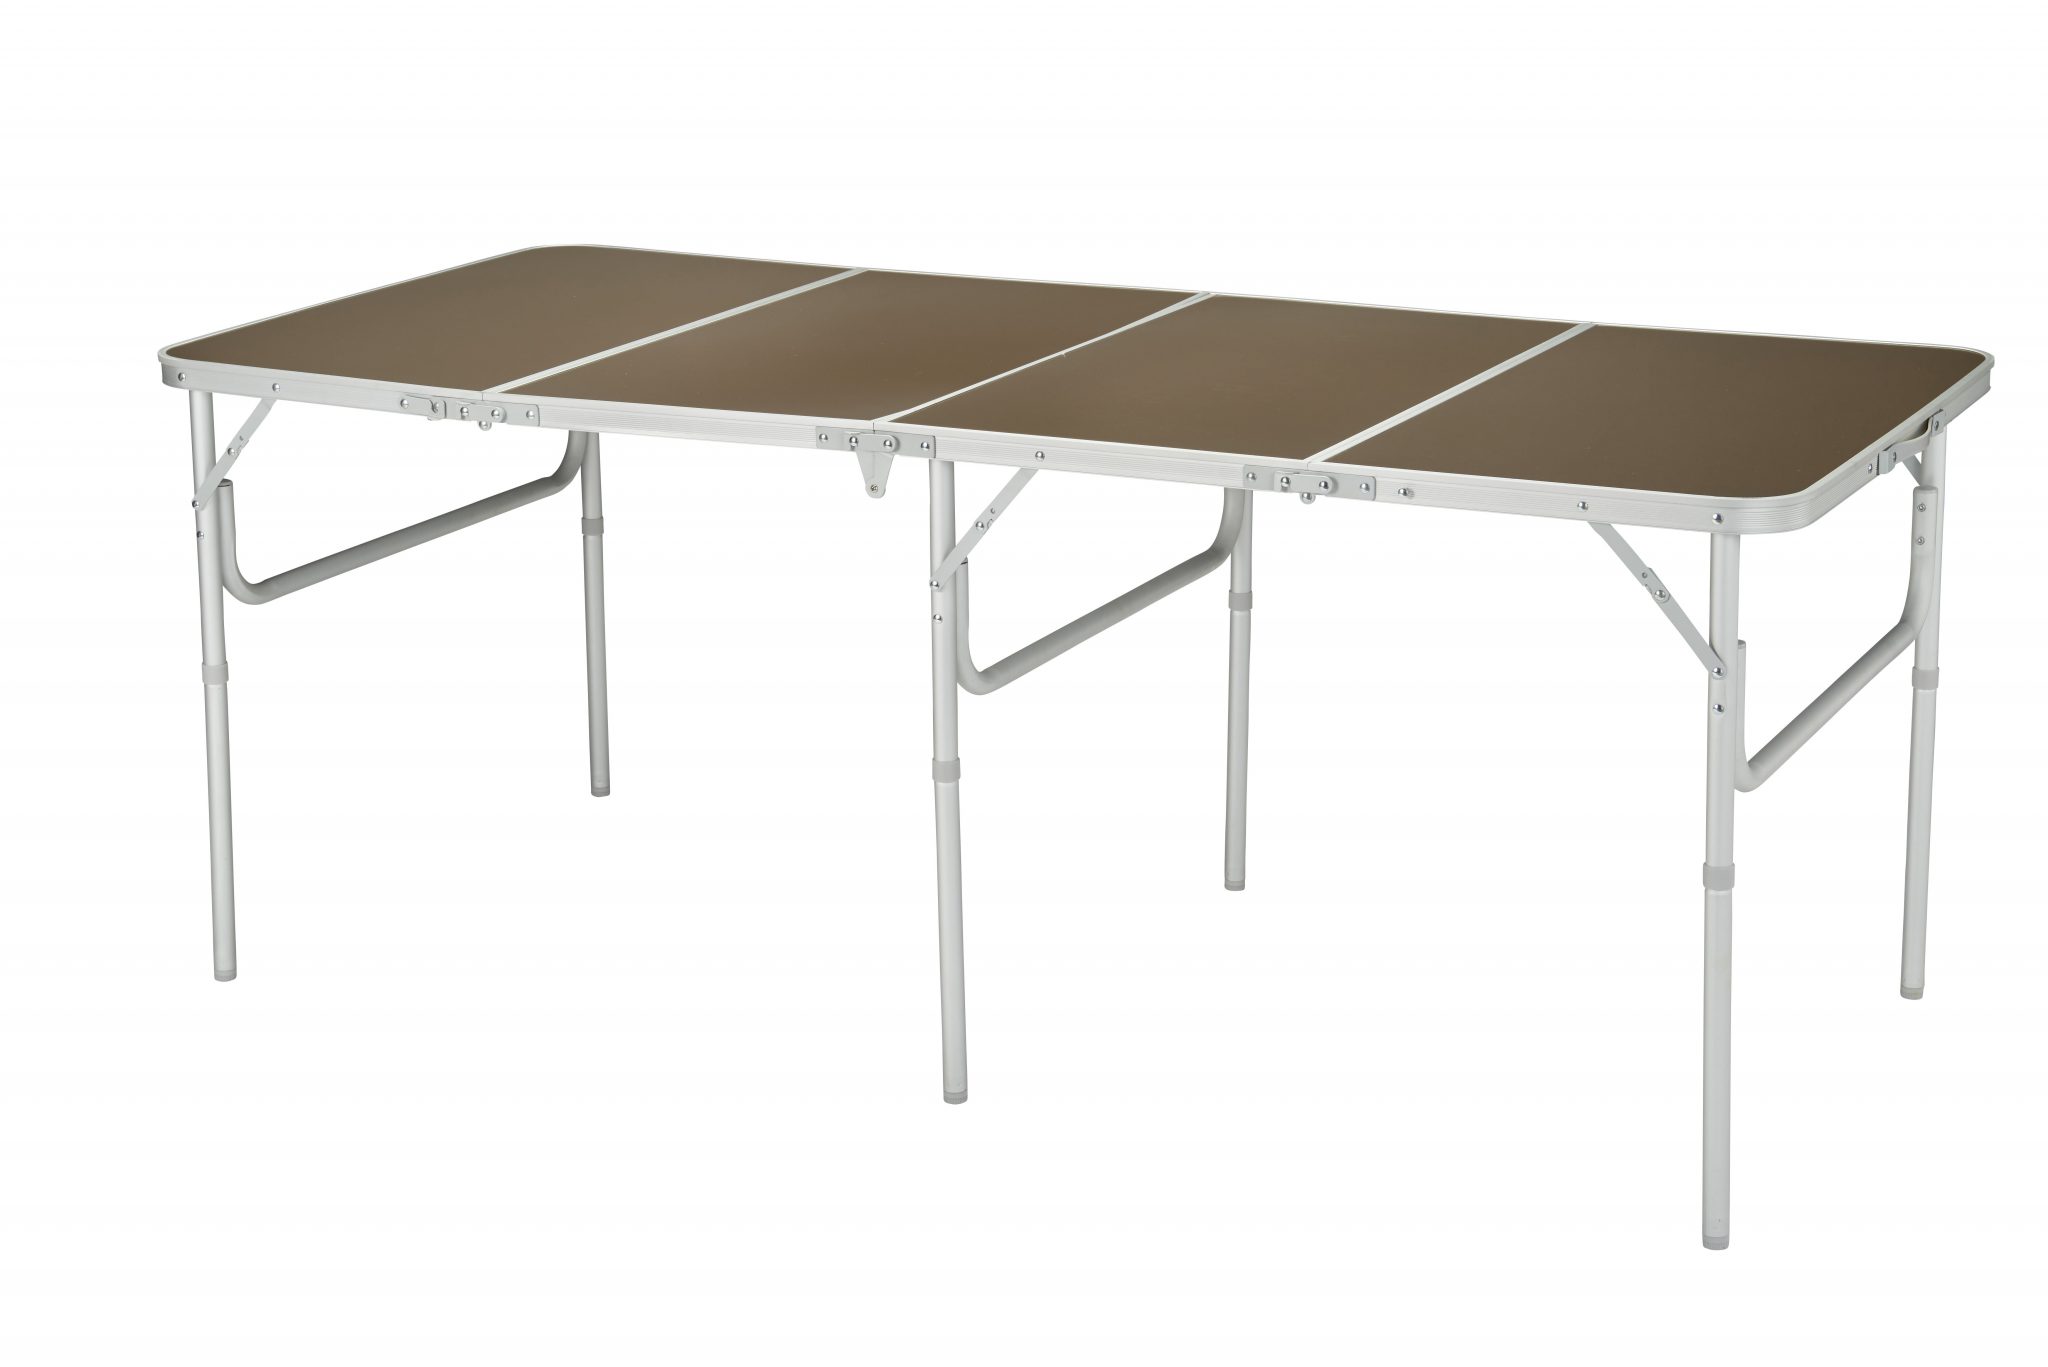 Table de camping valise carrefour